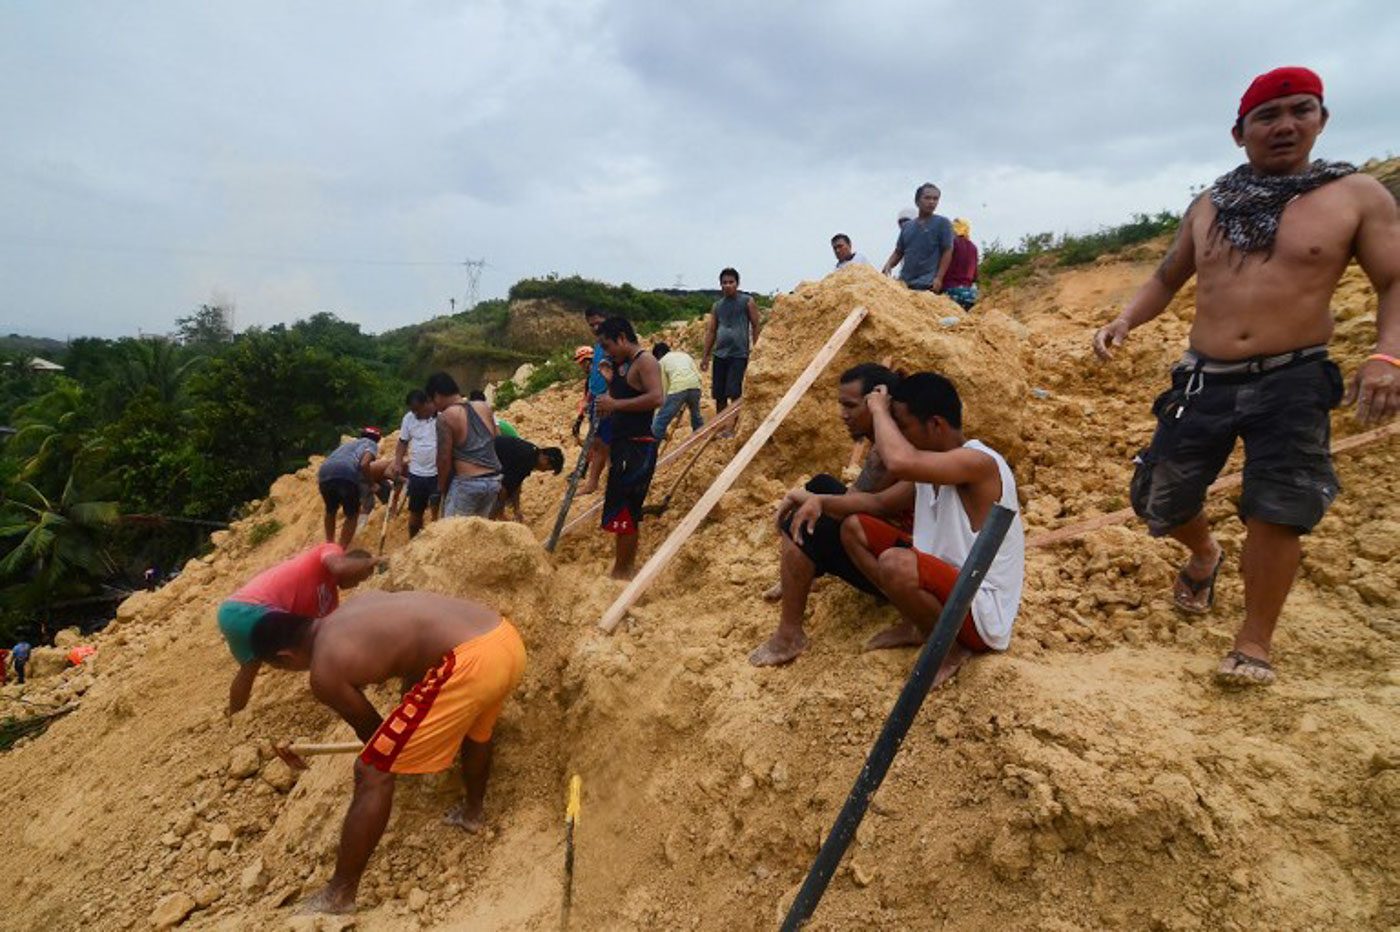 SEARCH AND RESCUE. Residents dig amongst the rubble as they help rescuers search for survivors at the landslide site in Naga City, on the popular tourist island of Cebu on September 20, 2018. Photo by Alan Tangcawan/AFP 